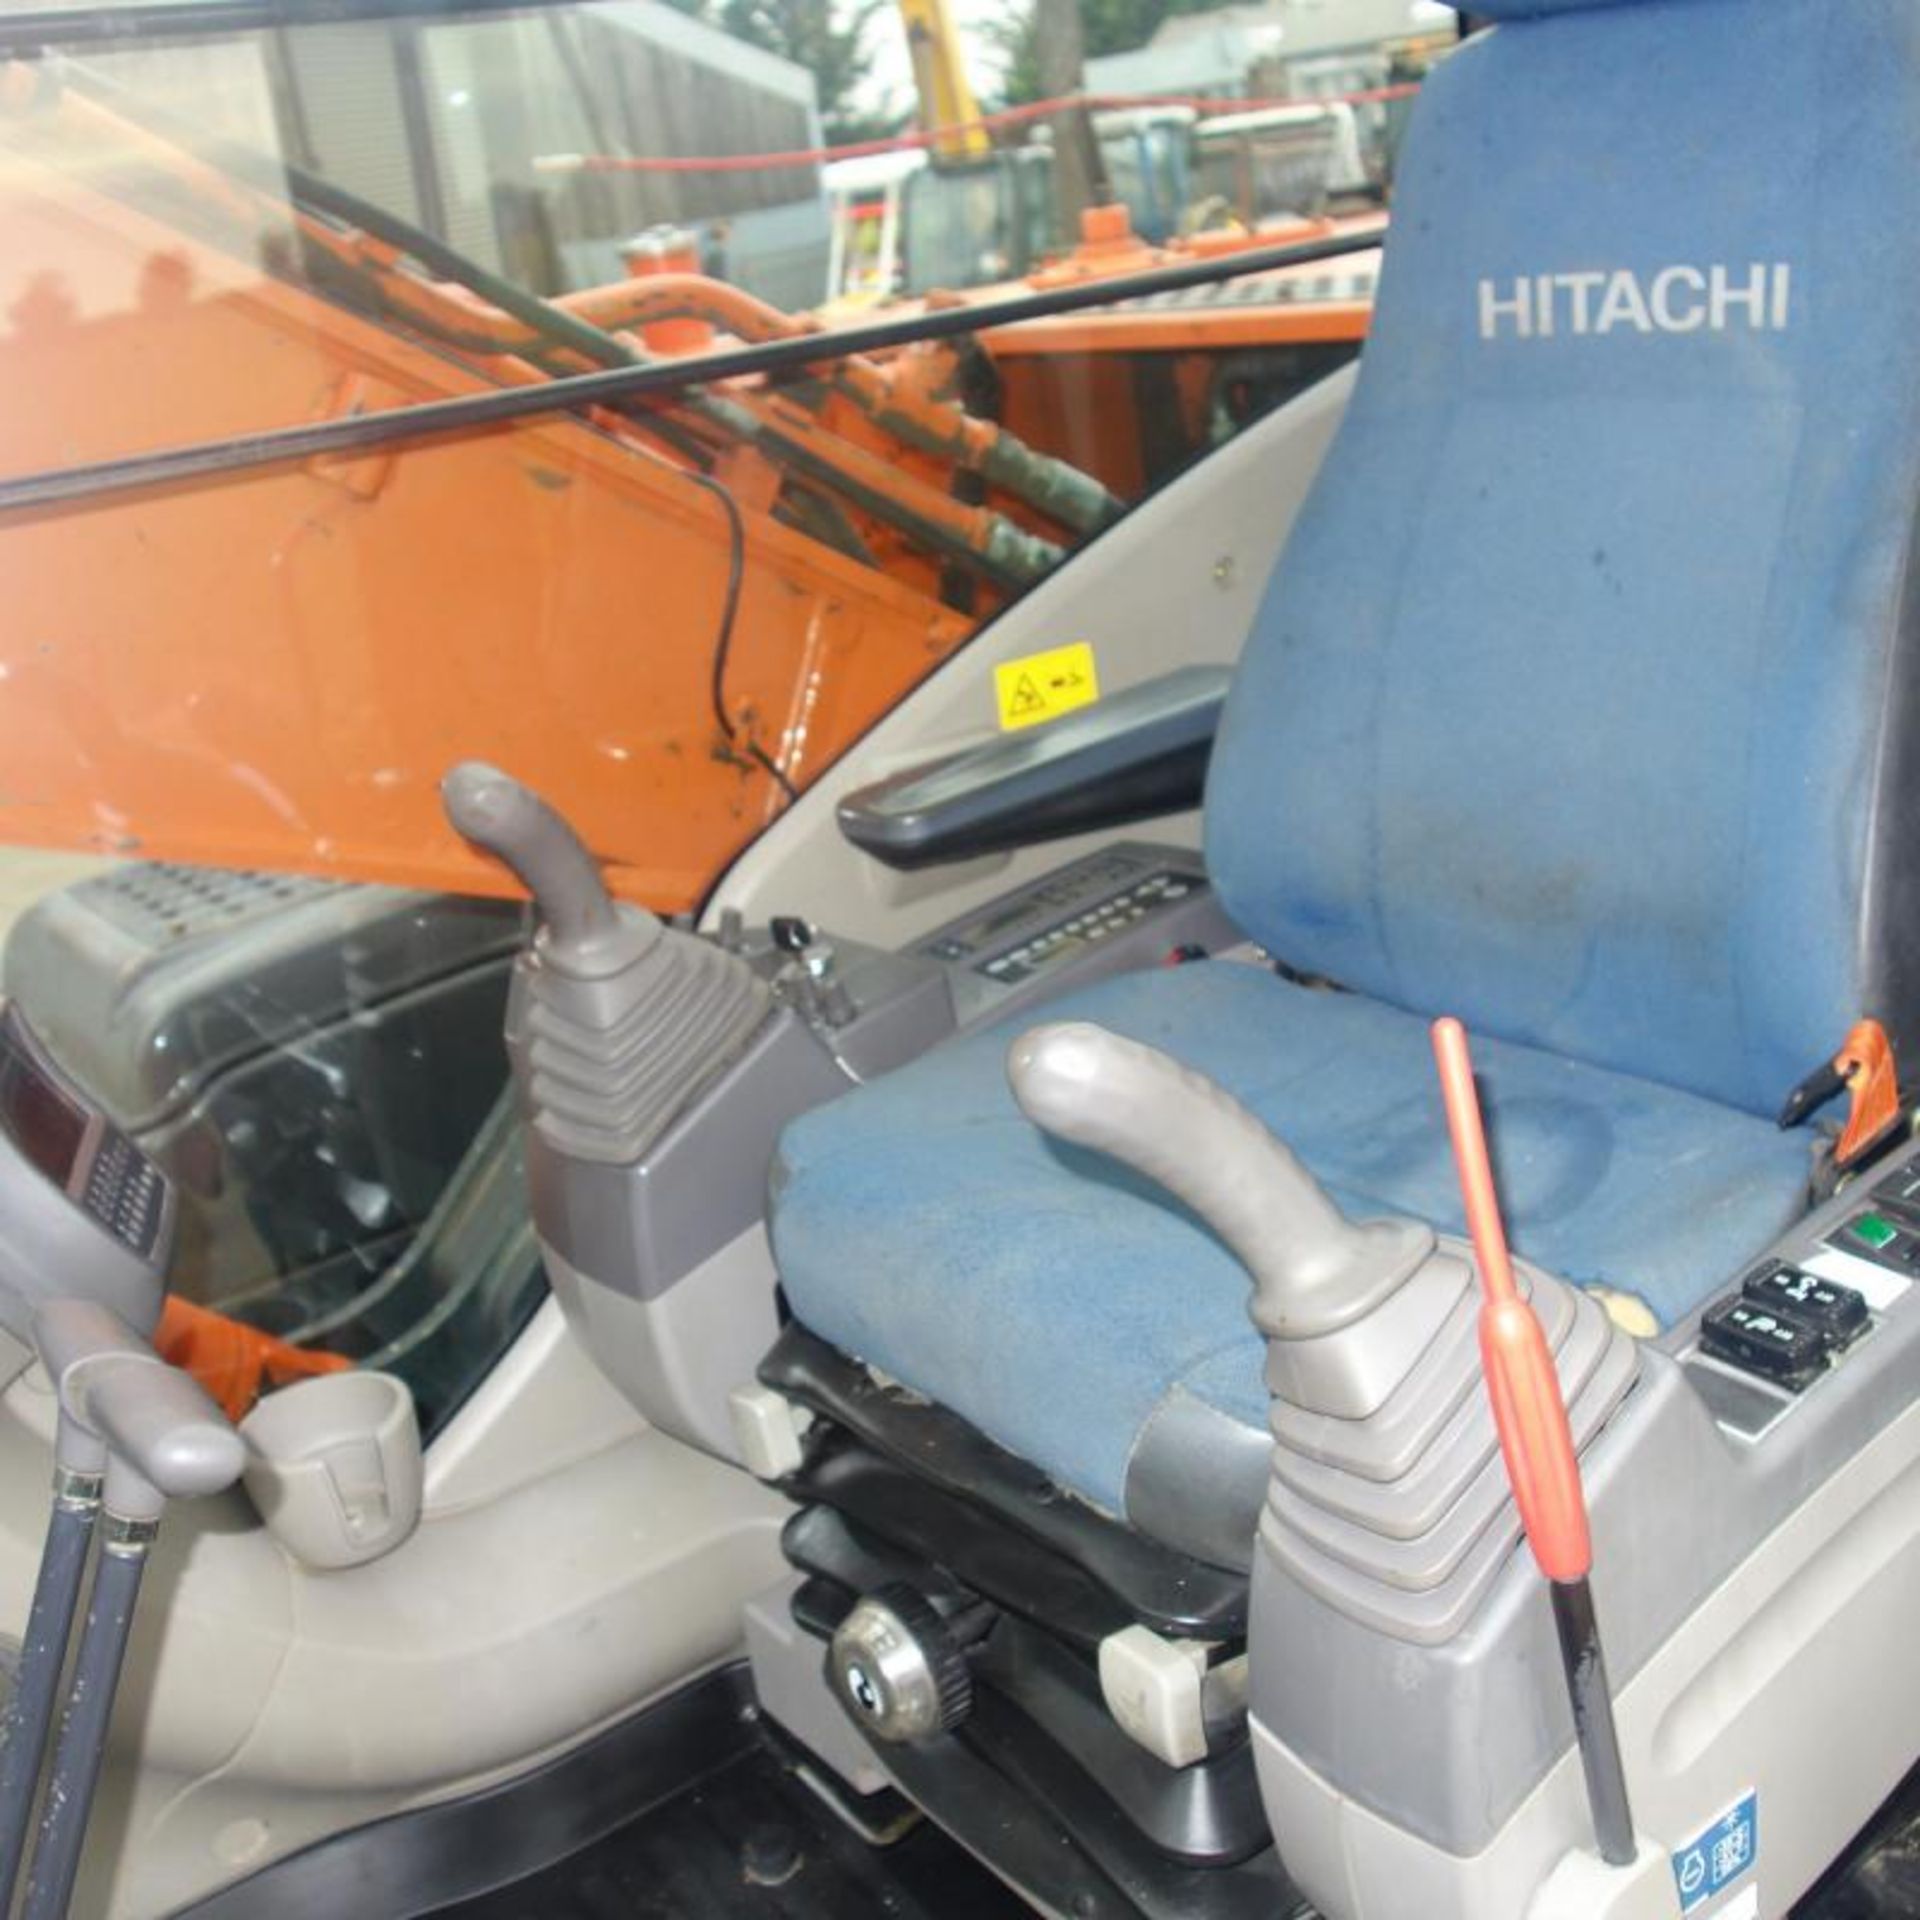 2012 Hitachi Zaxis ZX280LC-3 Digger - Image 7 of 16